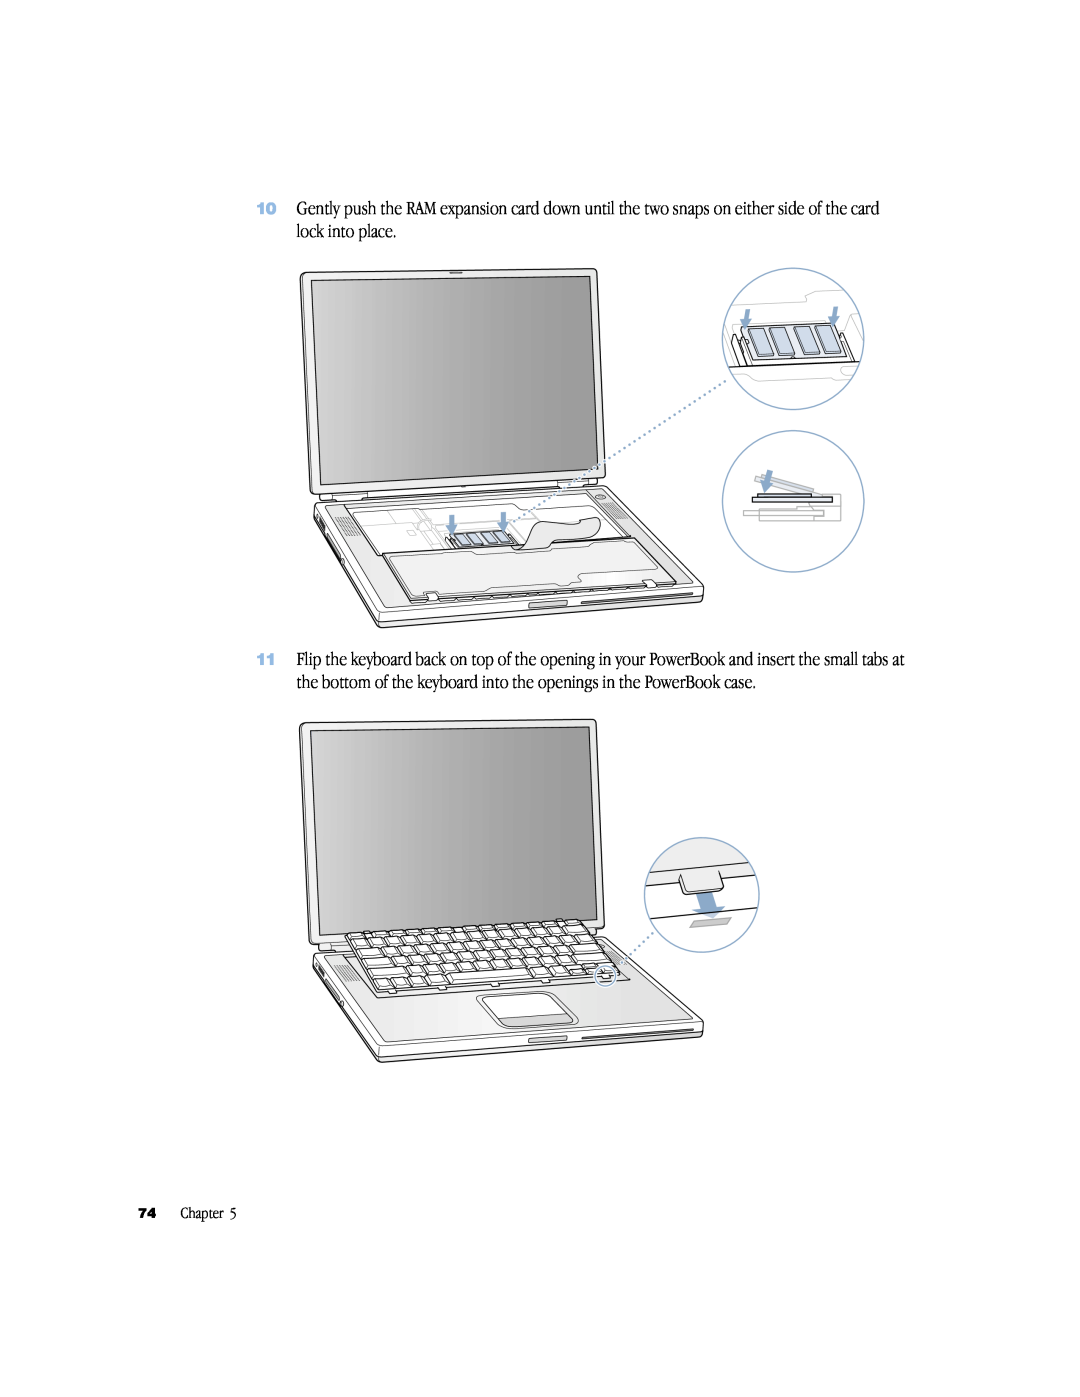 Apple powerbook g4 manual Chapter 